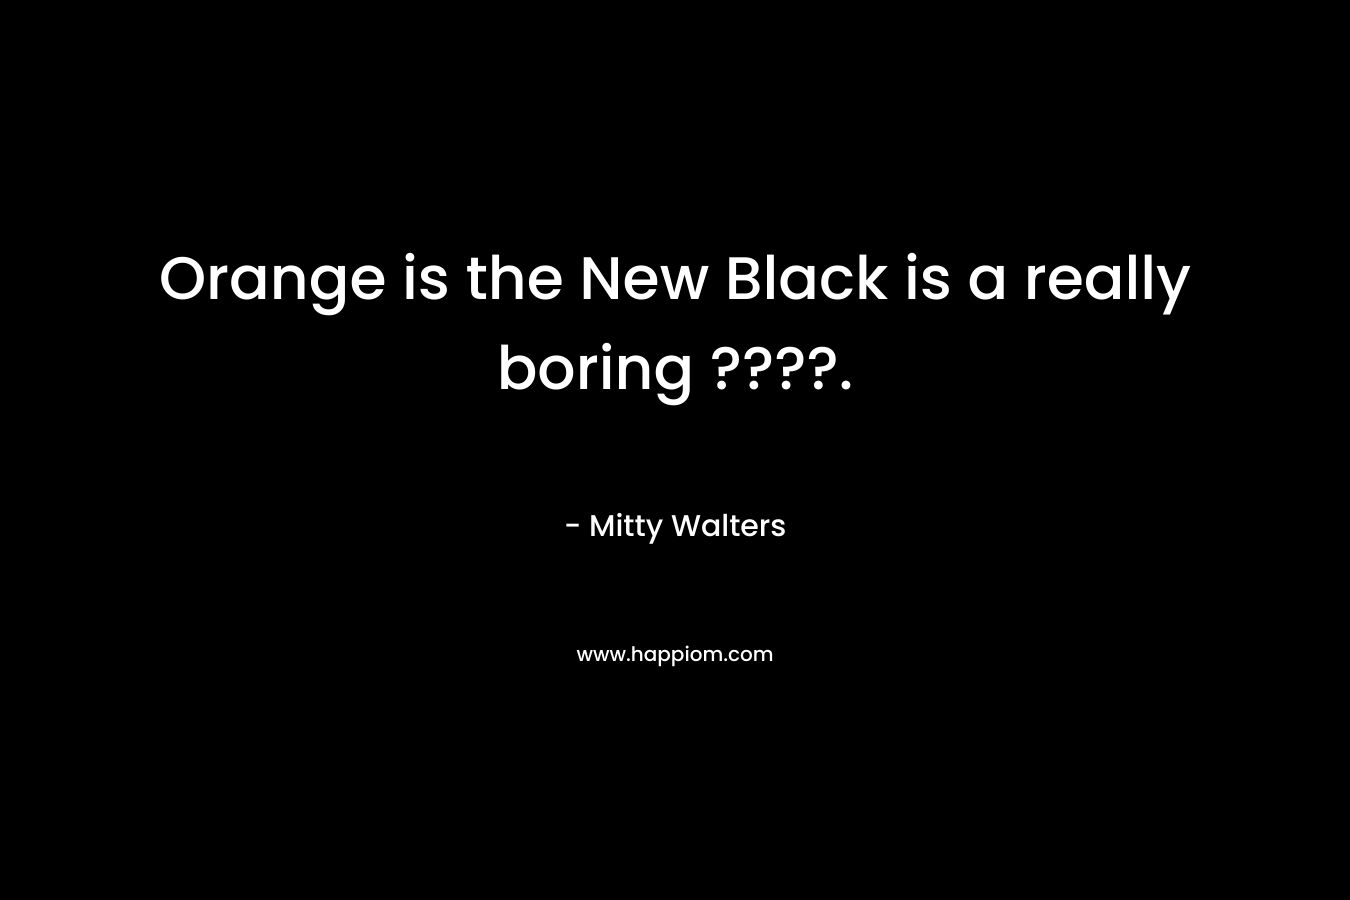 Orange is the New Black is a really boring ????. – Mitty Walters